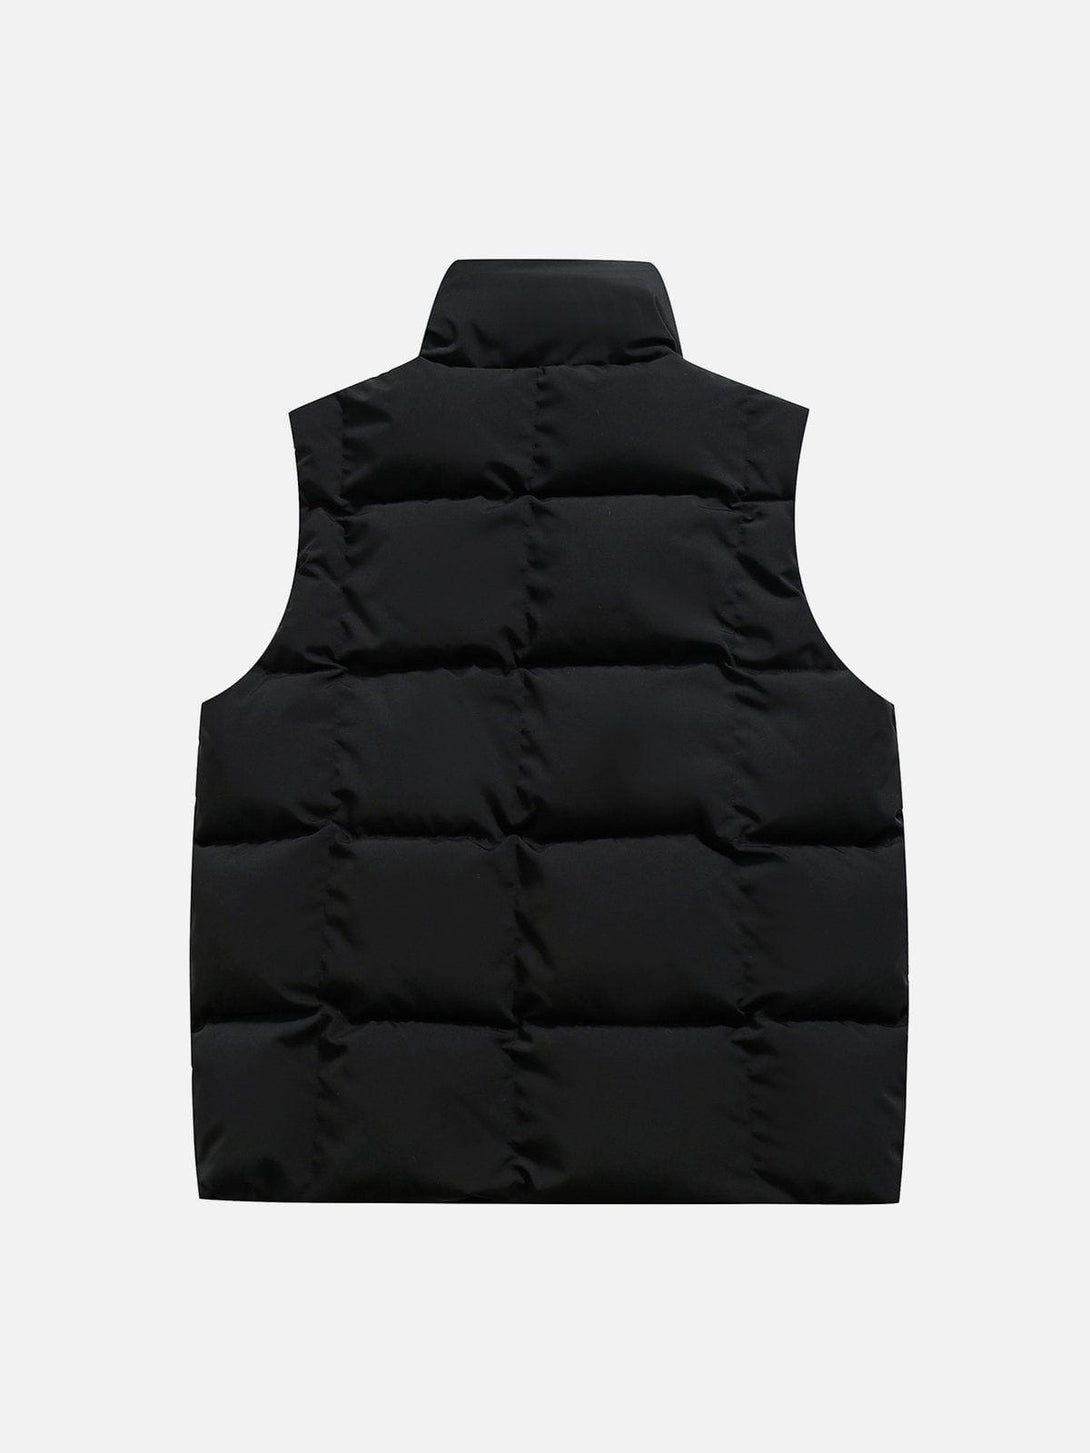 Levefly - Solid Casual Gilet - Streetwear Fashion - levefly.com